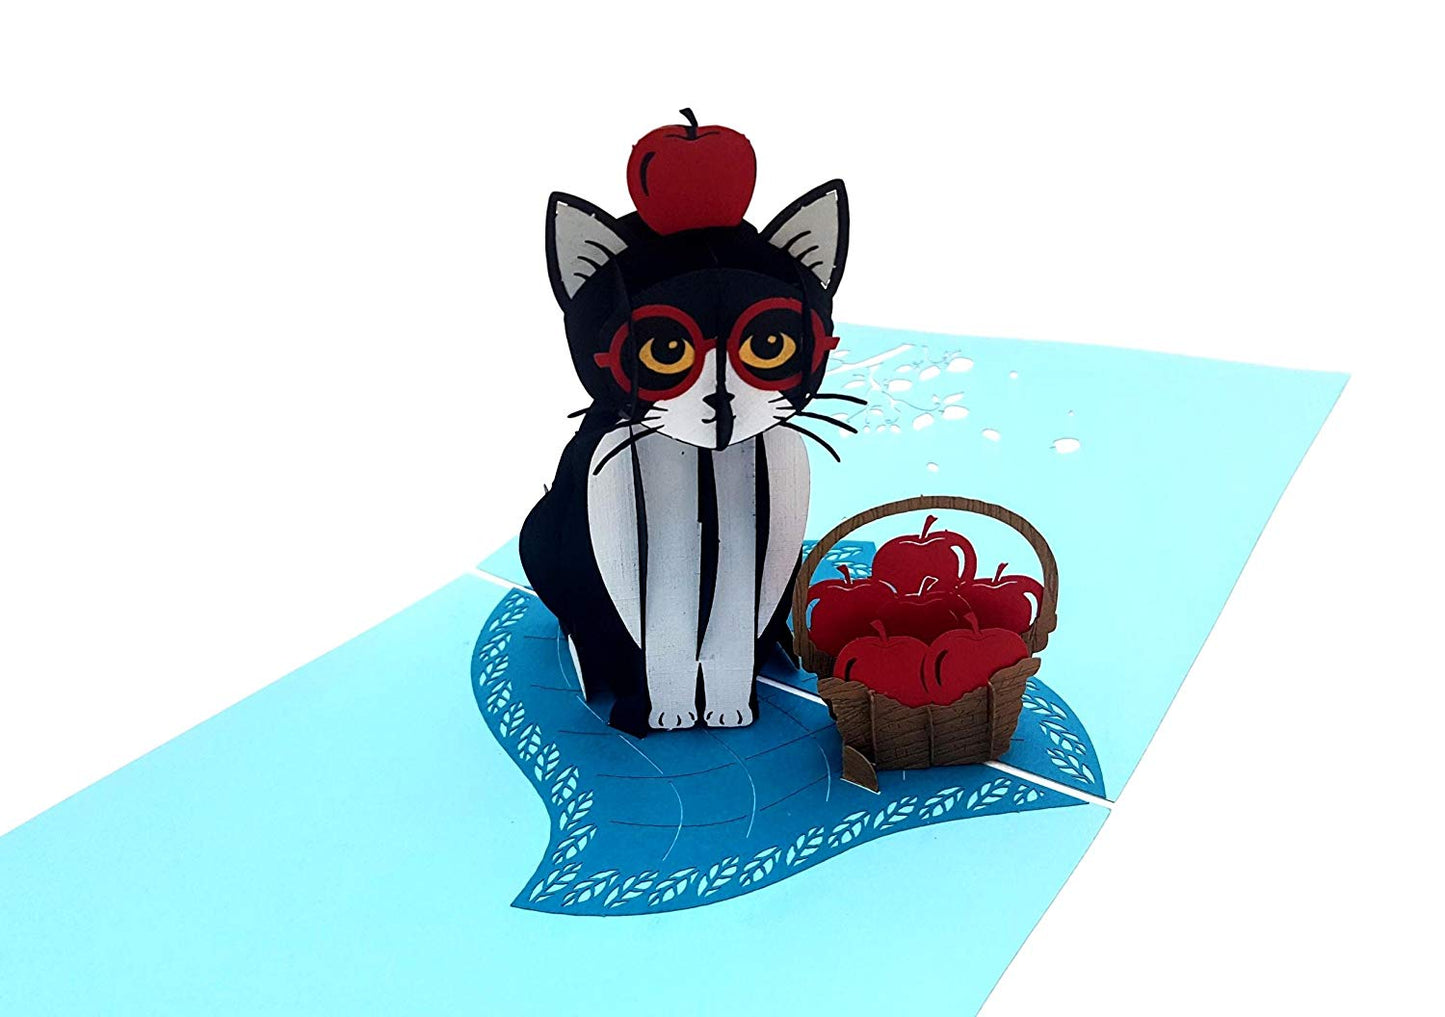 Tuxedo Cat 3D Pop Up Greeting Card - Animal - Birthday - birthday card from cat to owner - birthday - iGifts And Cards